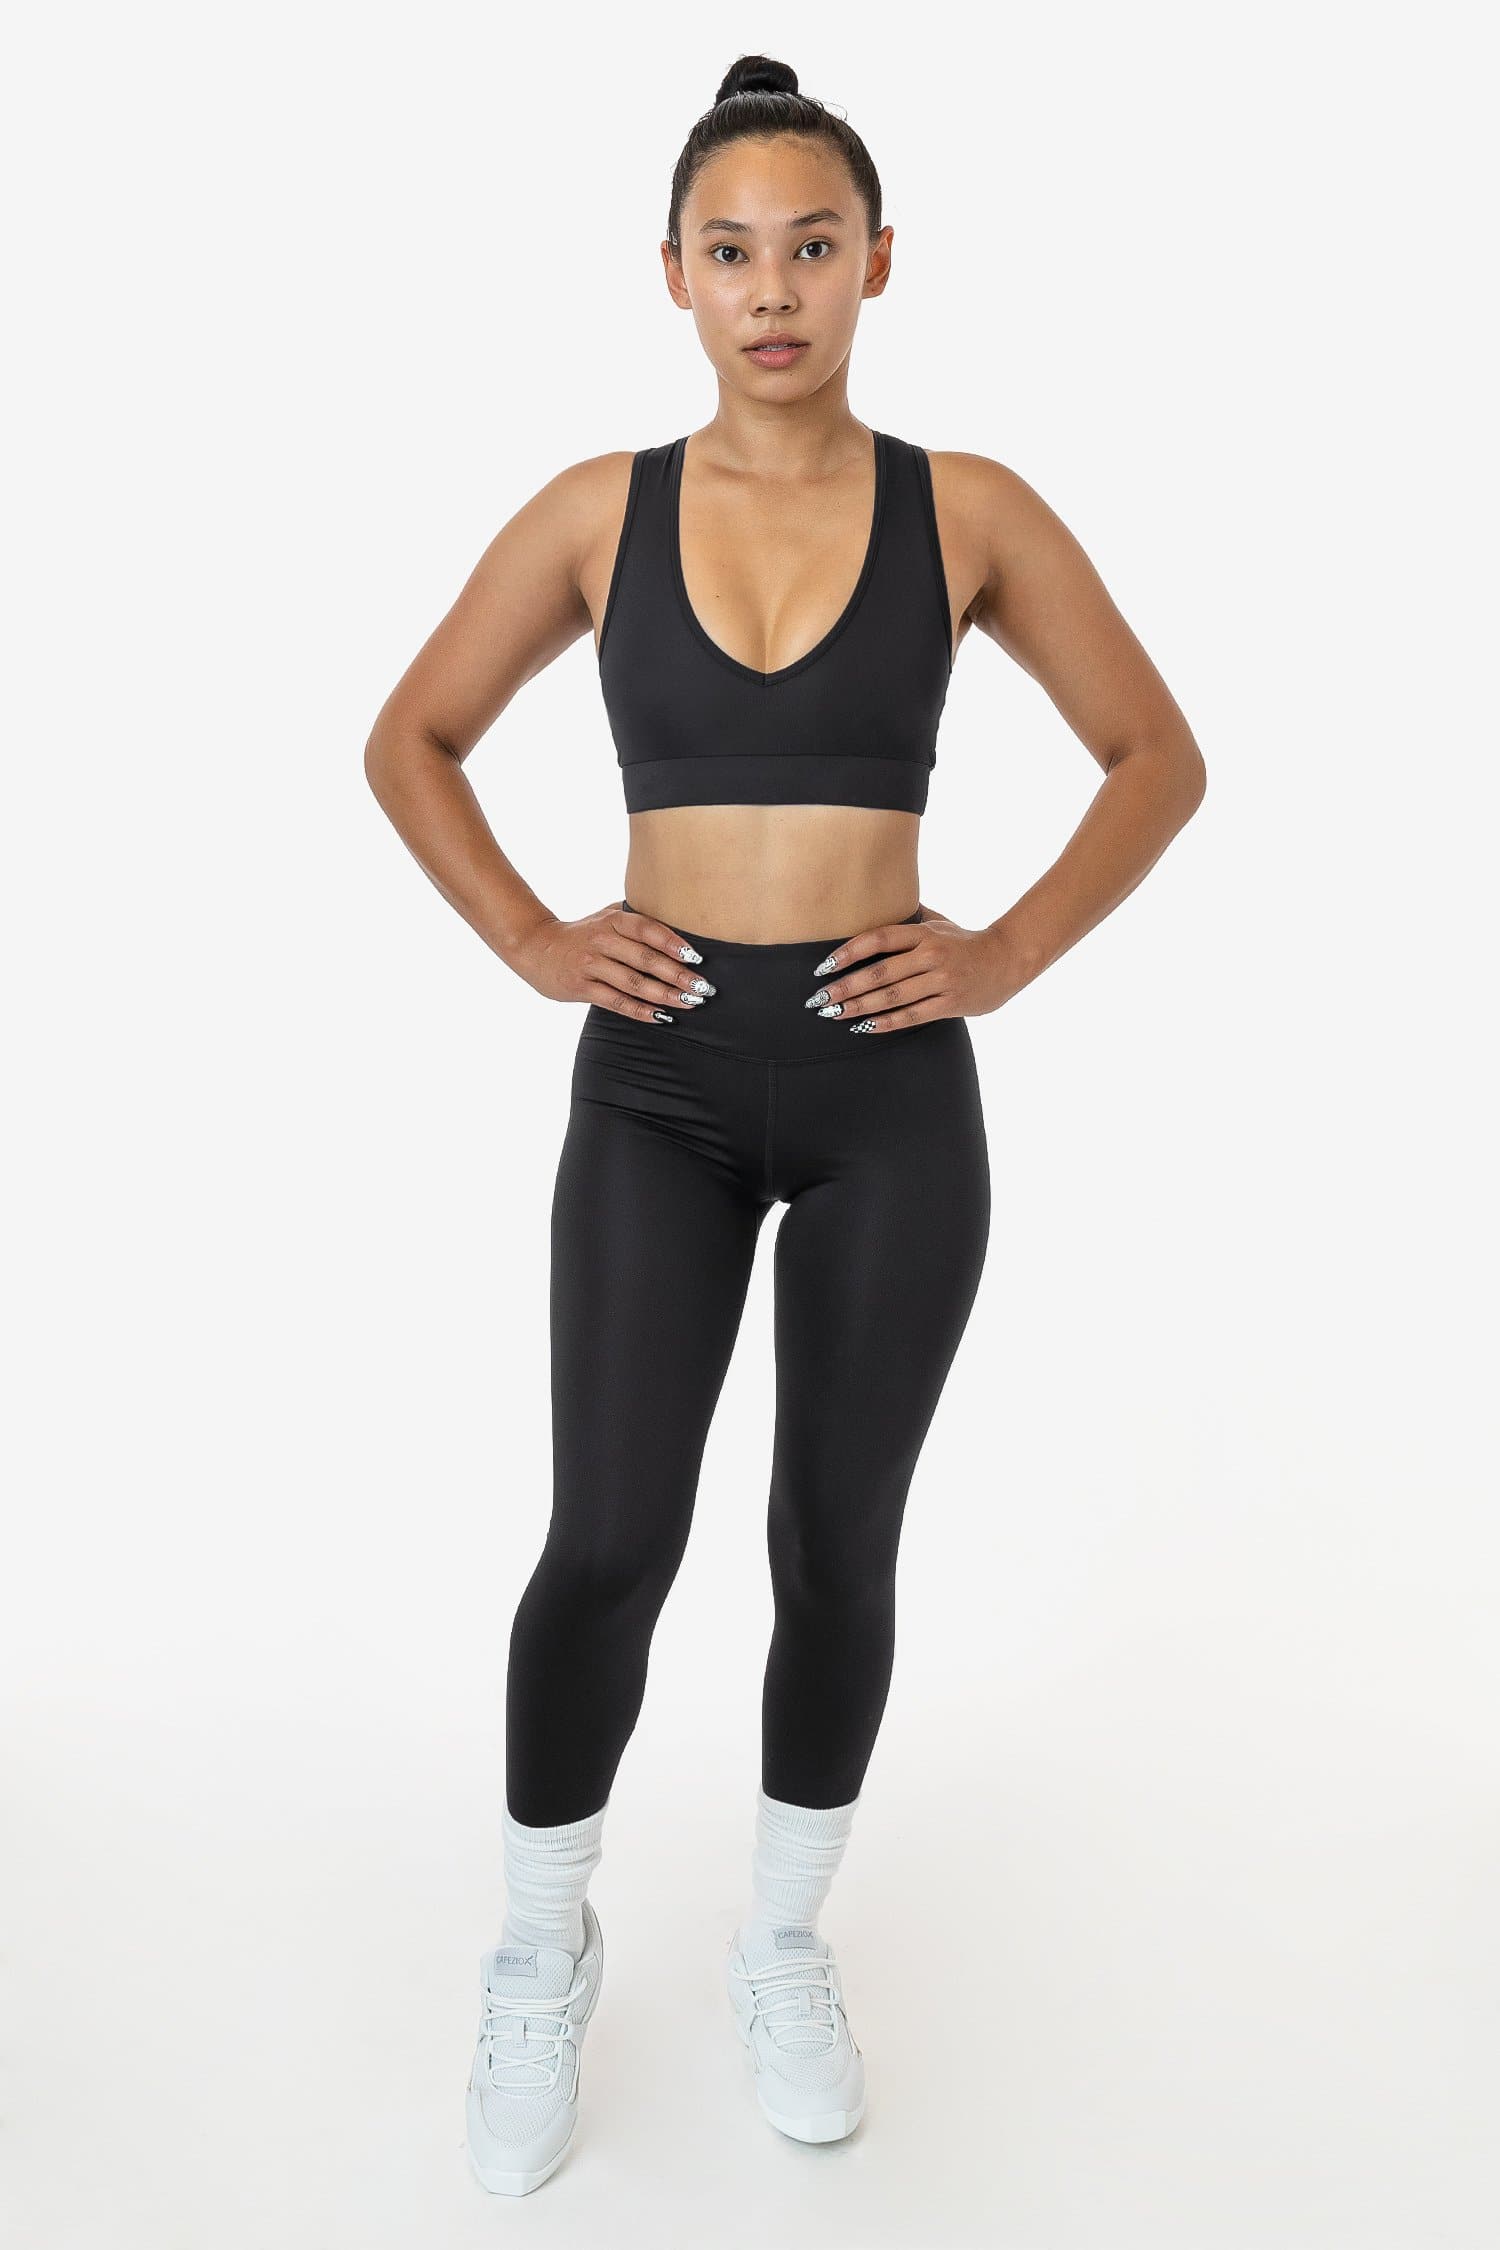 Nike Sports Bras for sale in Los Angeles, California, Facebook Marketplace